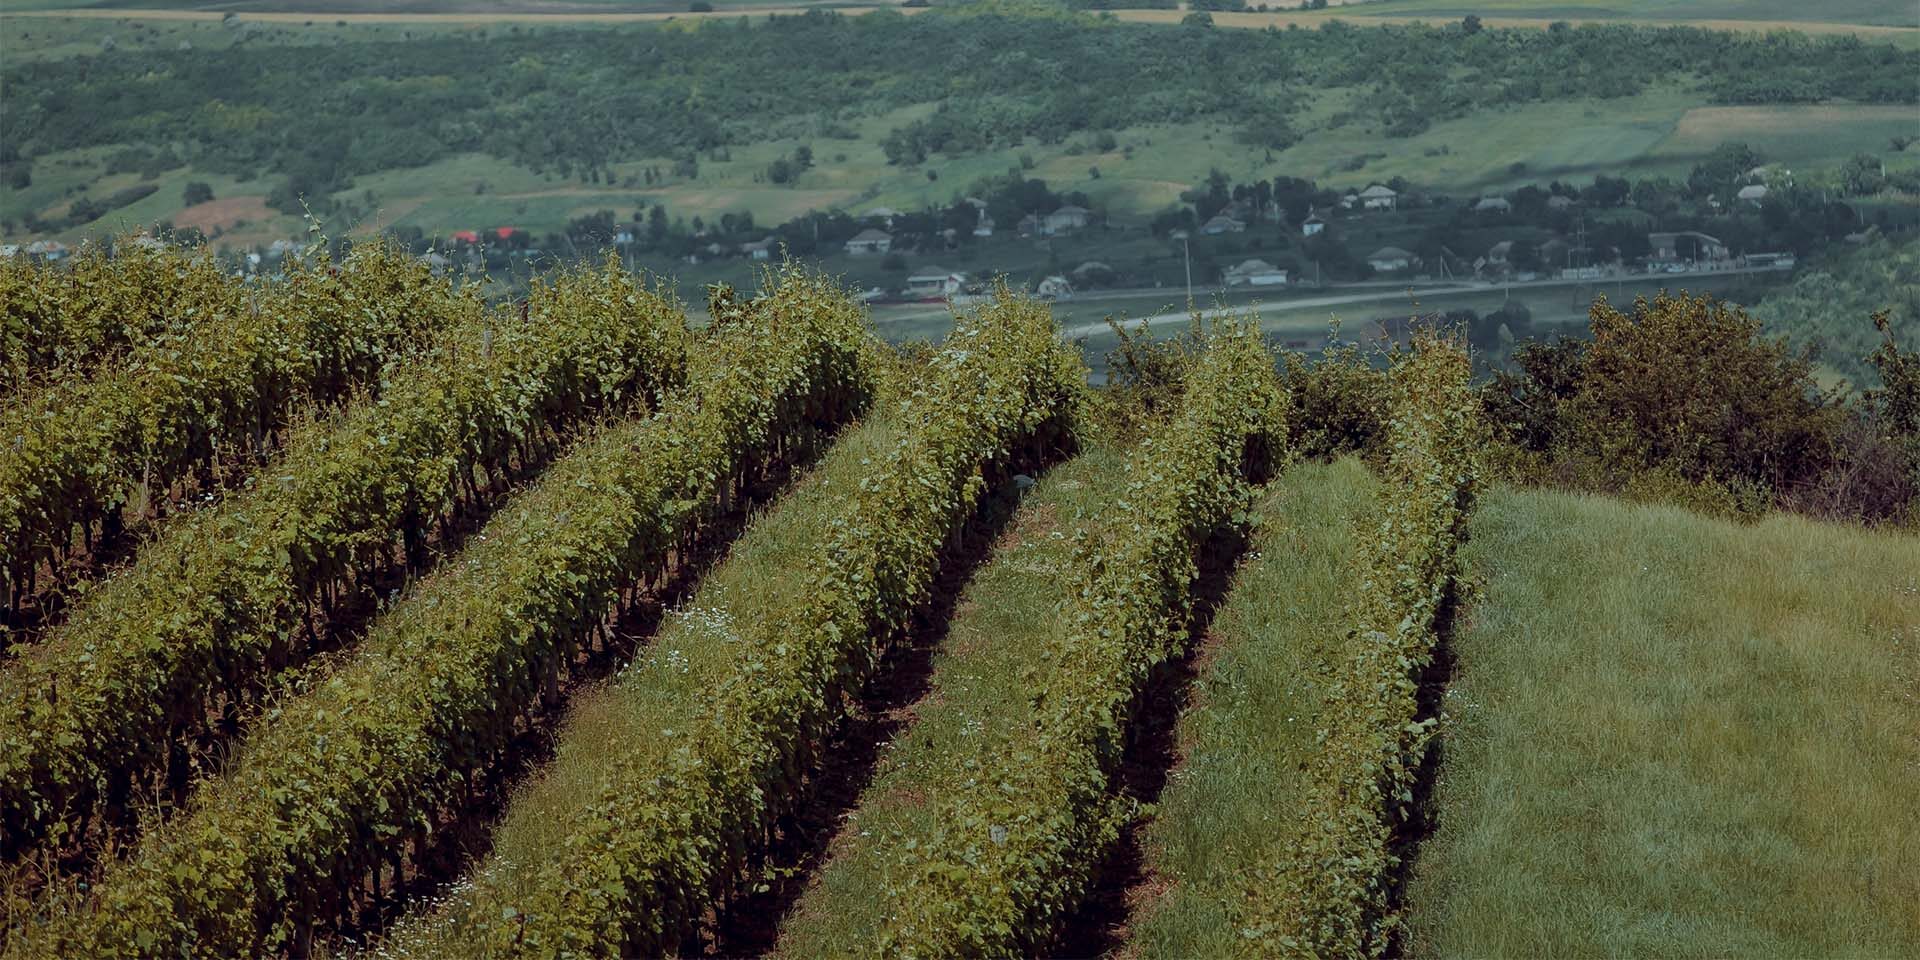 An image of a vineyard in Moldova.